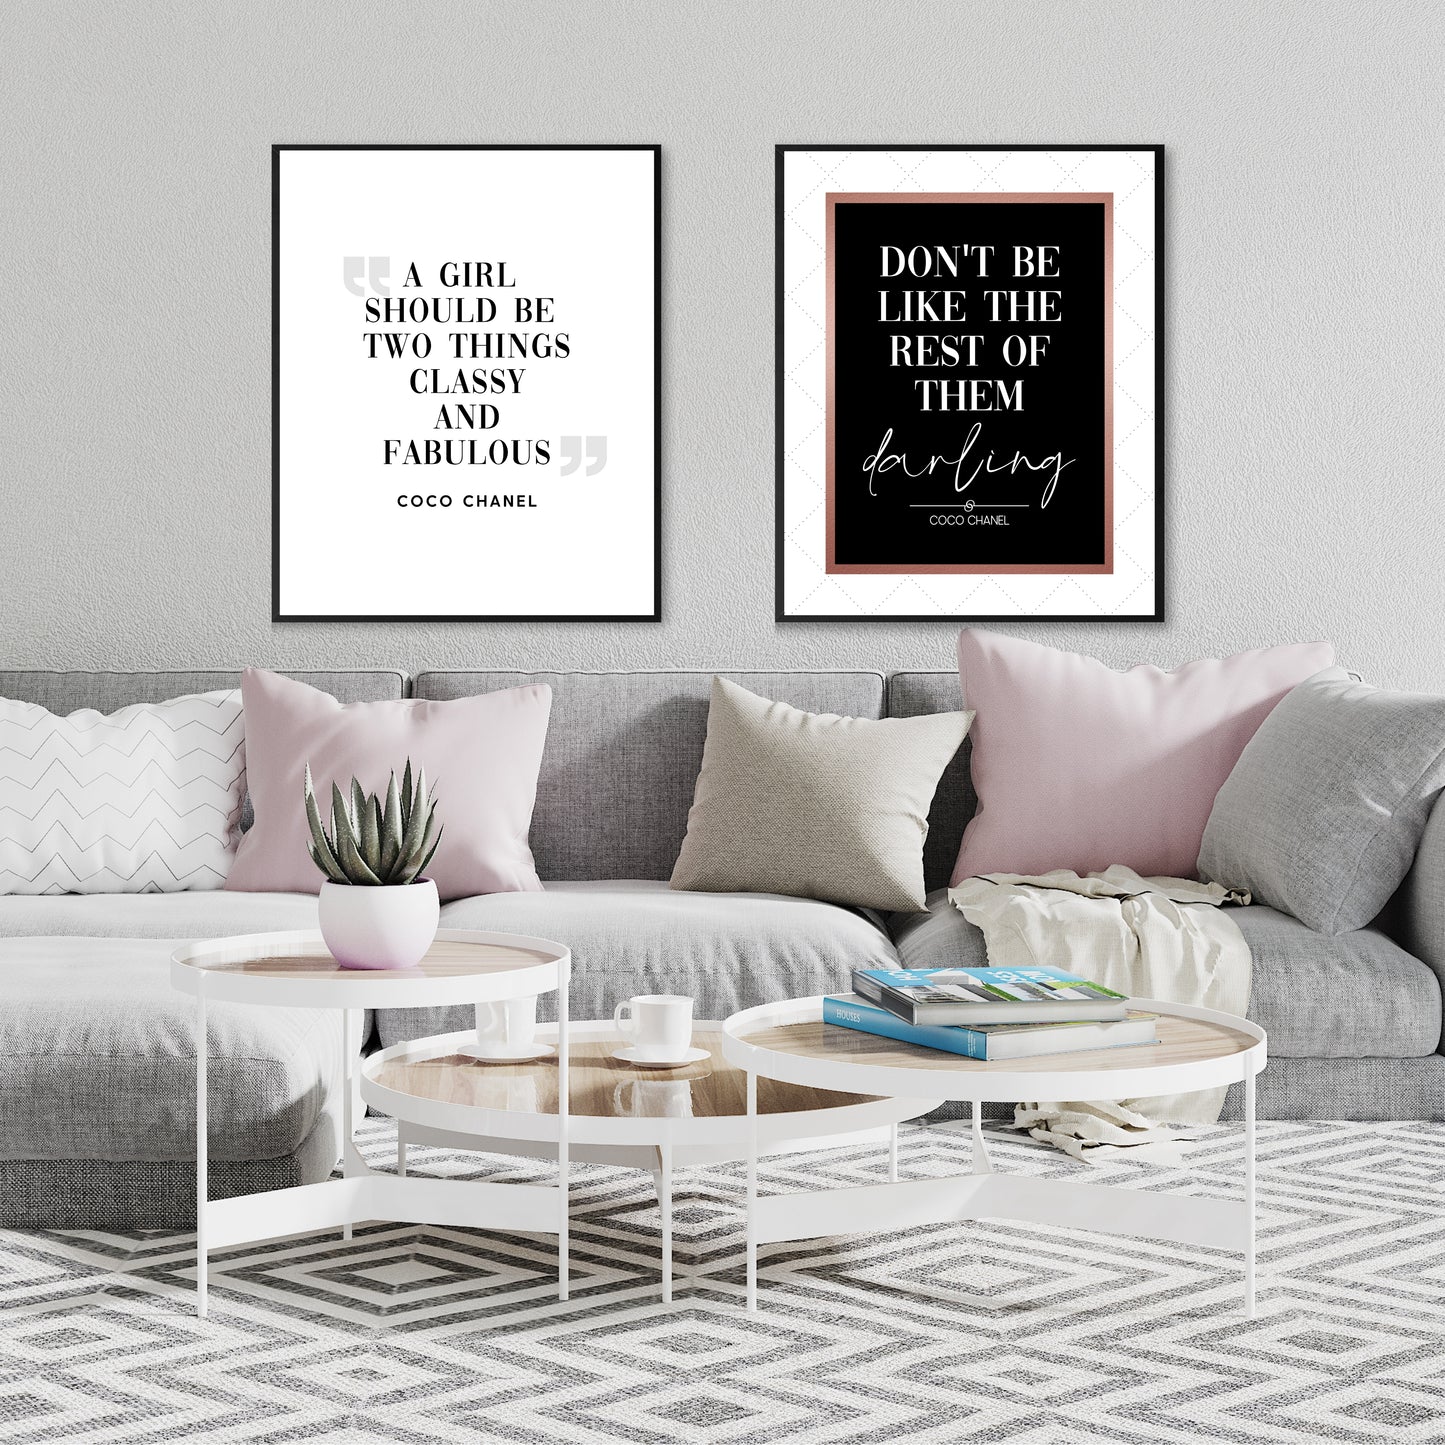 "Don't Be Like The Rest Of Them Darling," Famous Quote by Coco Chanel With Rose Gold Border, Printable Art